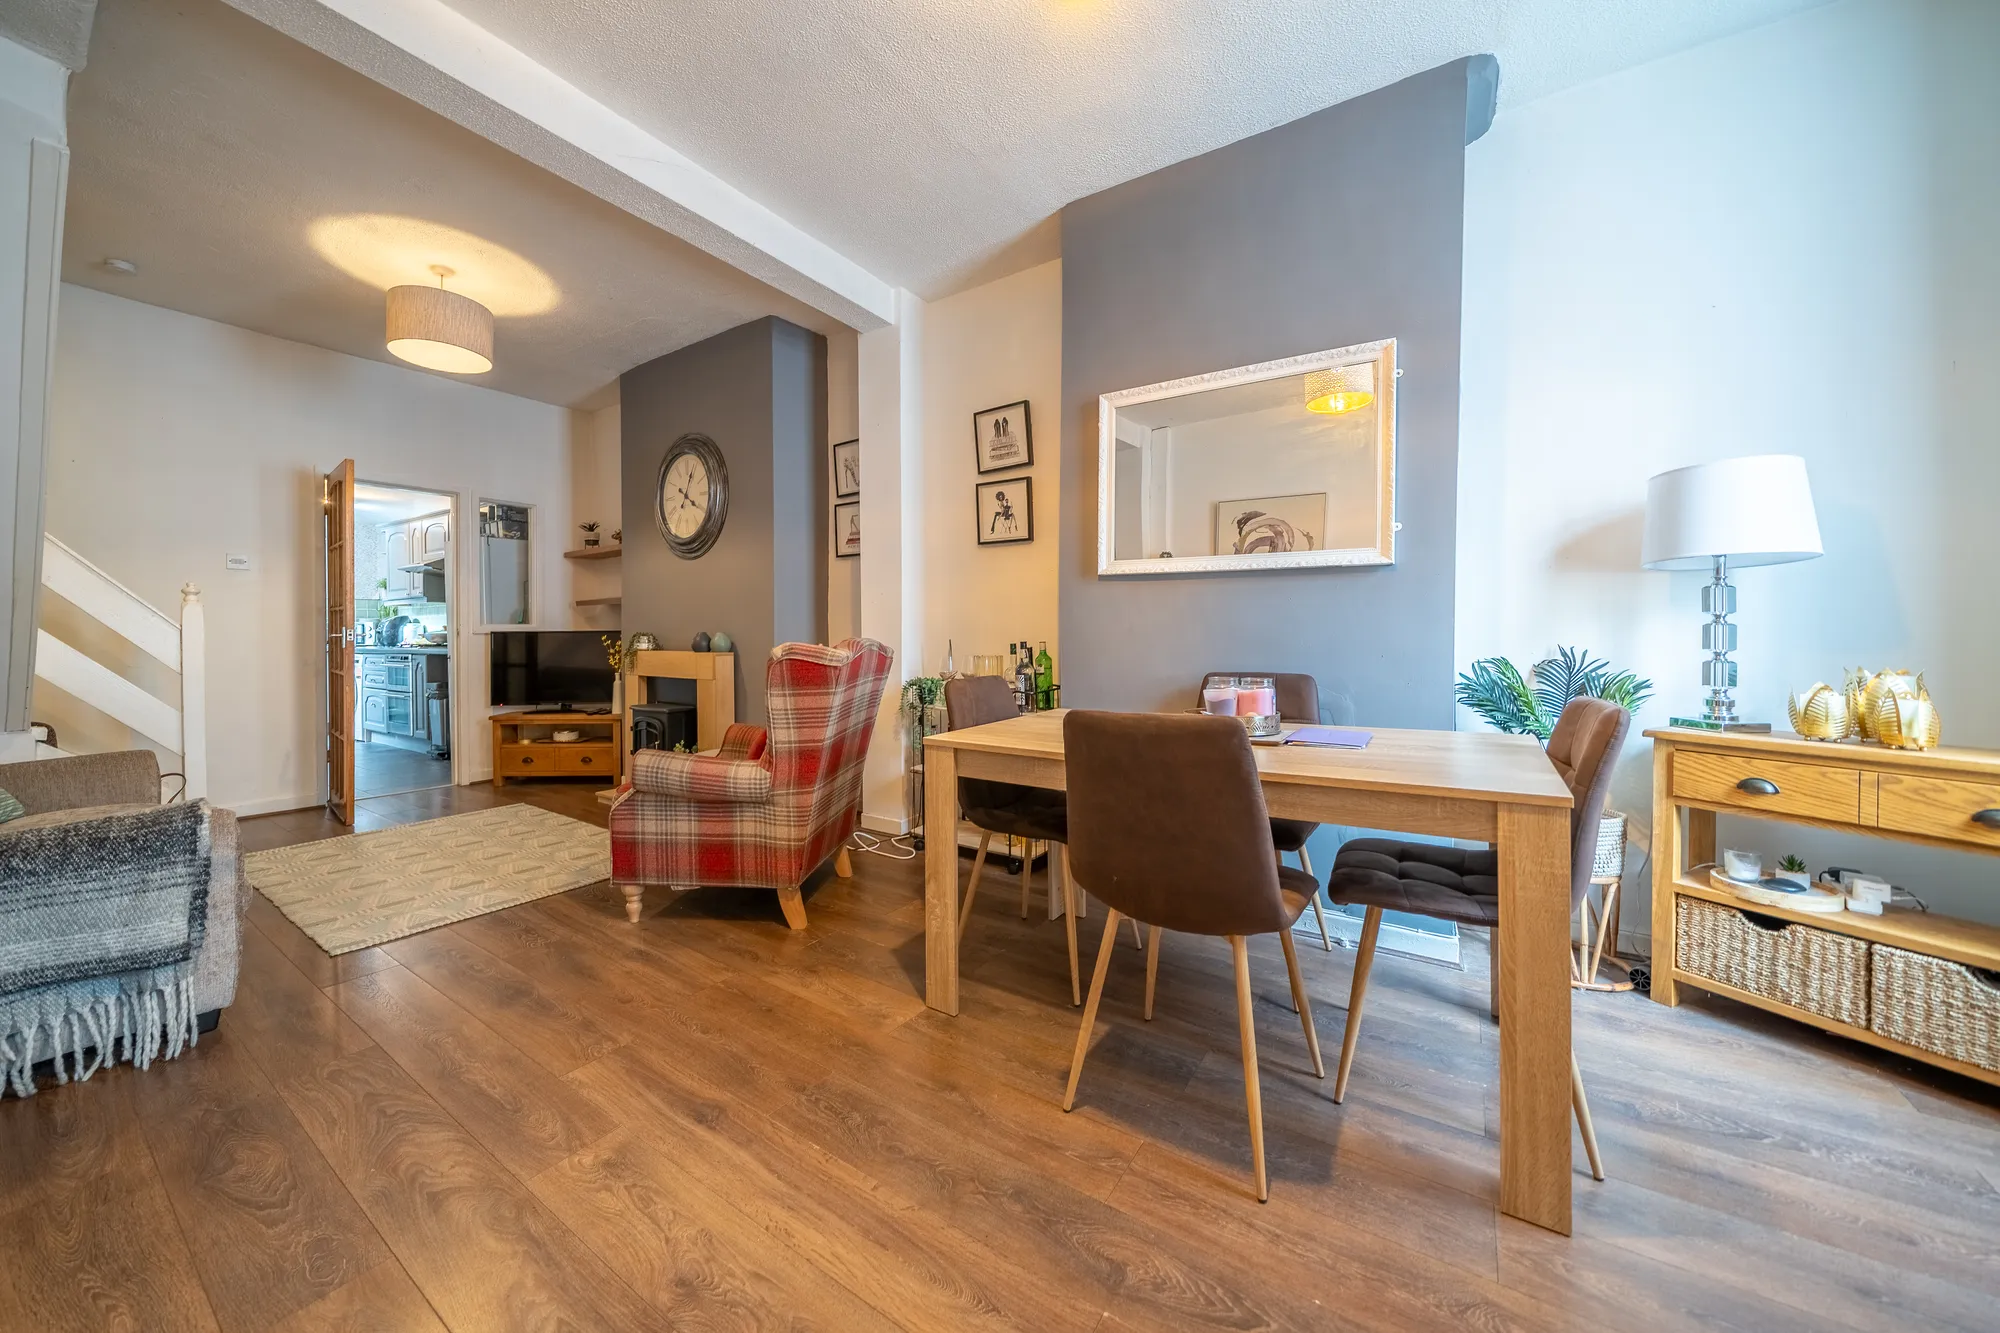 Charming 2-bed mid-terraced gem in Crosby with open plan lounge, galley kitchen, and ground floor bath. Ideal for first-time buyers or investors. No chain. Tranquil cul-de-sac off College Road